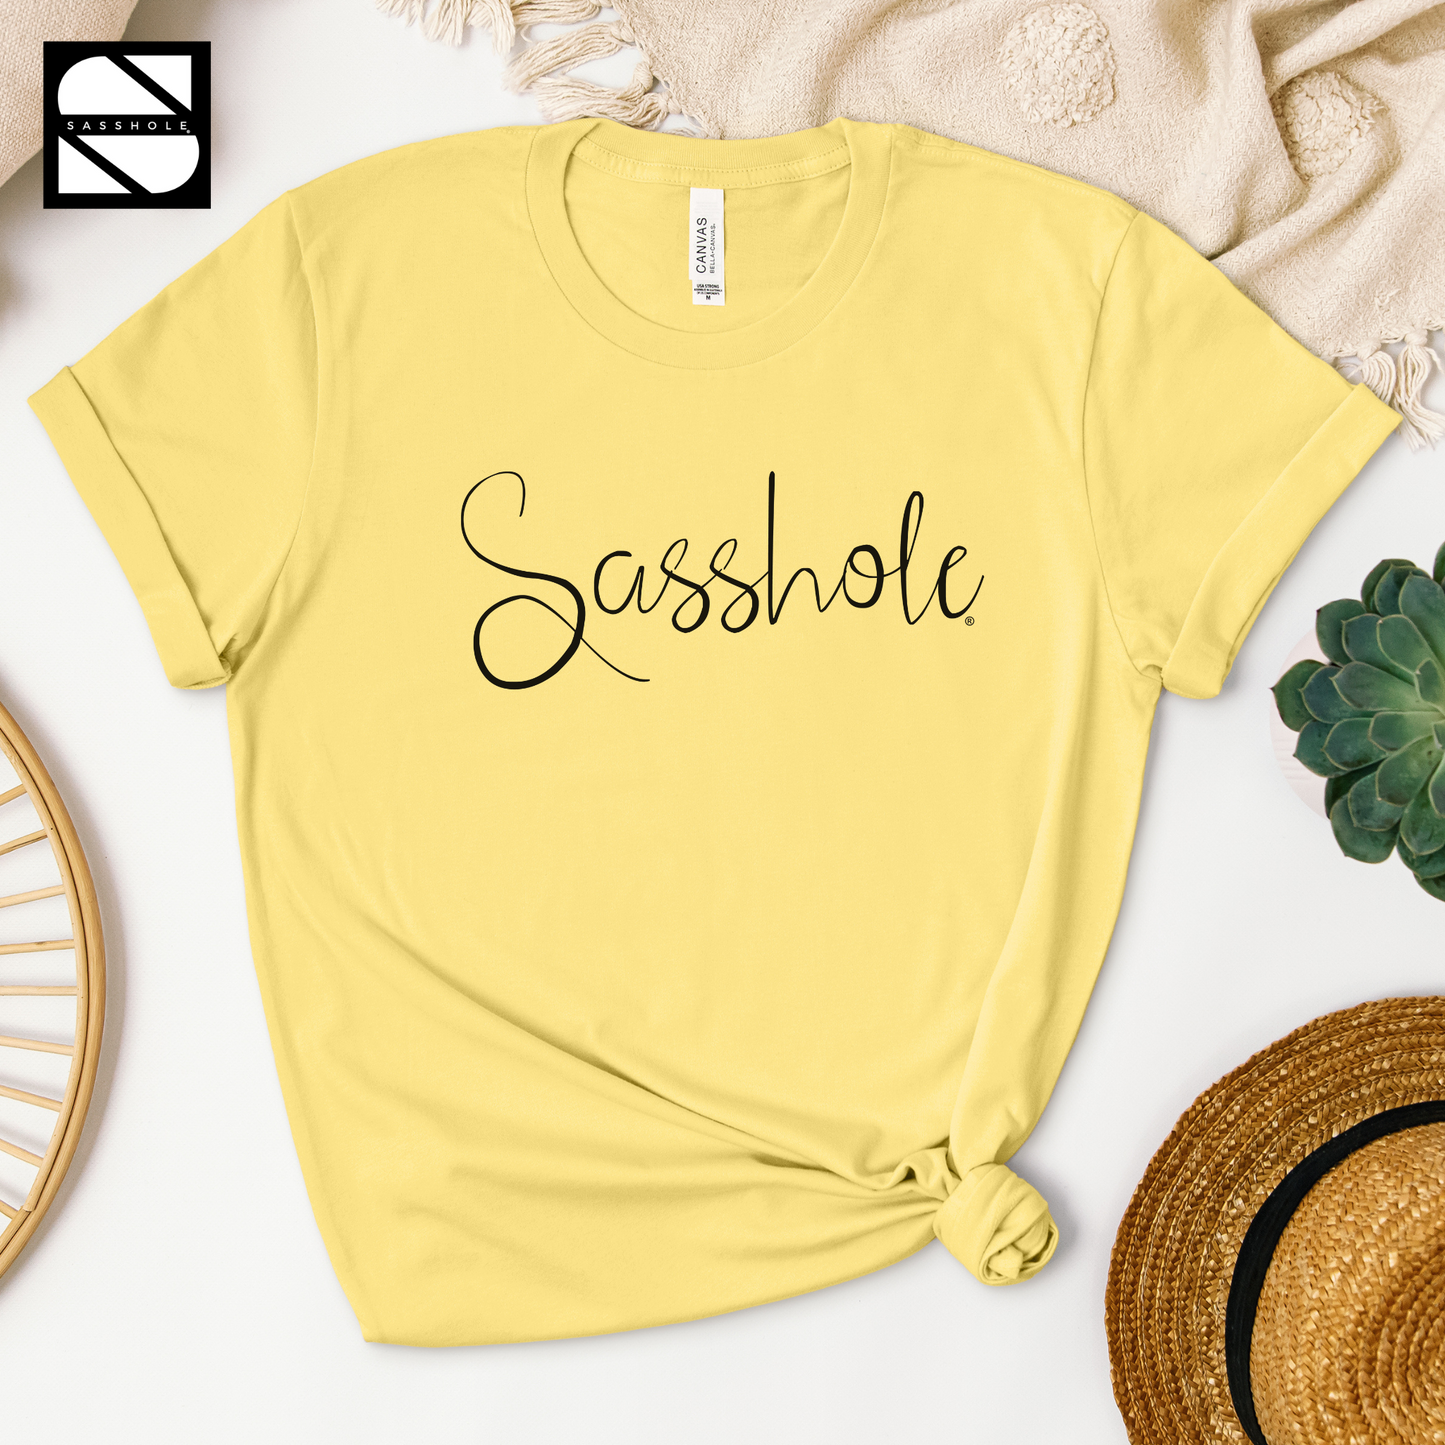 yellow t-shirt, Women’s Country Girl Shirt, women's t-shirt, Women's funny tees, Women's fashion statement tee with sassy attitude, Women's fashion, Women's Clothing, witty fashion, white t-shirt, vibrant women's clothing, Unisex Shirt, Unisex, unique tee, unique t-shirt, unique graphic tees, unconventional fashion, unconventional, Unapologetic, tshirts, trendy t-shirt